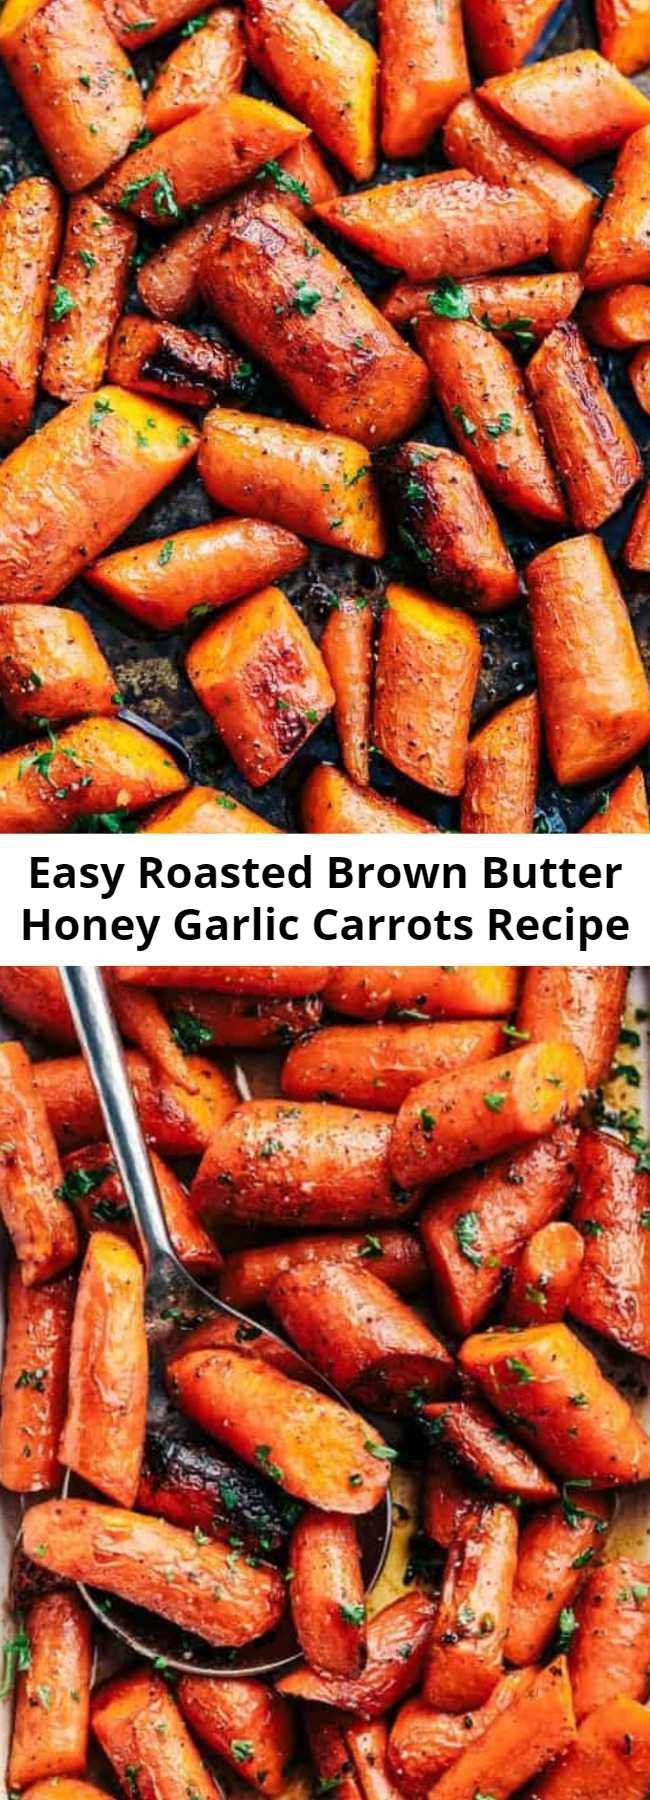 Easy Roasted Brown Butter Honey Garlic Carrots Recipe - Roasted Brown Butter Honey Garlic Carrots make an excellent side dish. Roasted to tender perfection in the most incredible brown butter honey garlic sauce these will become a new favorite!